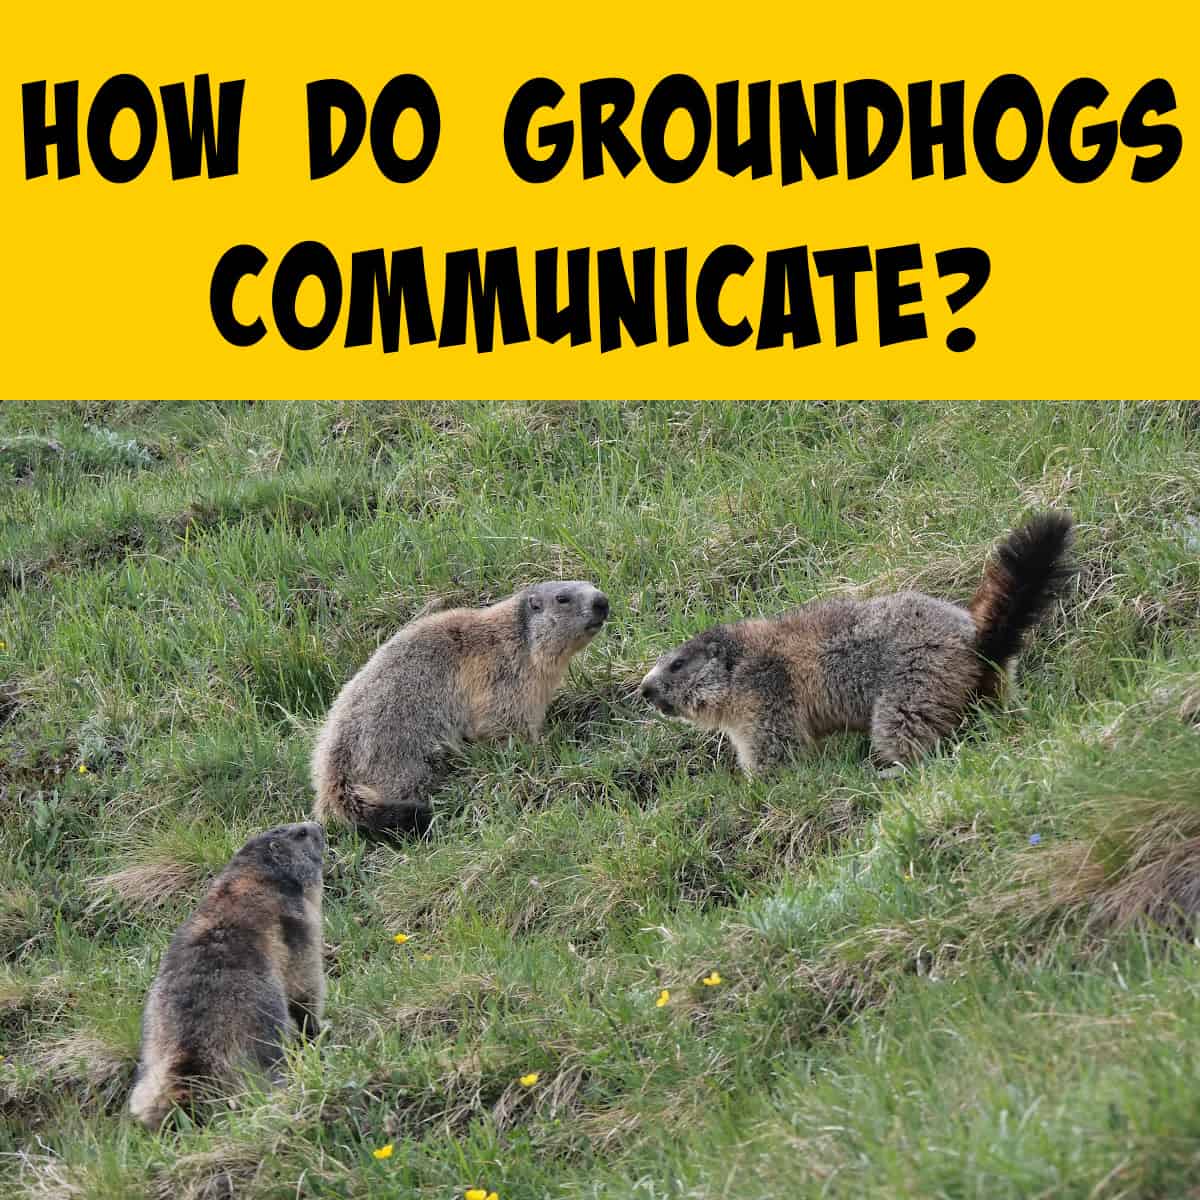 Group of Groundhogs in a field